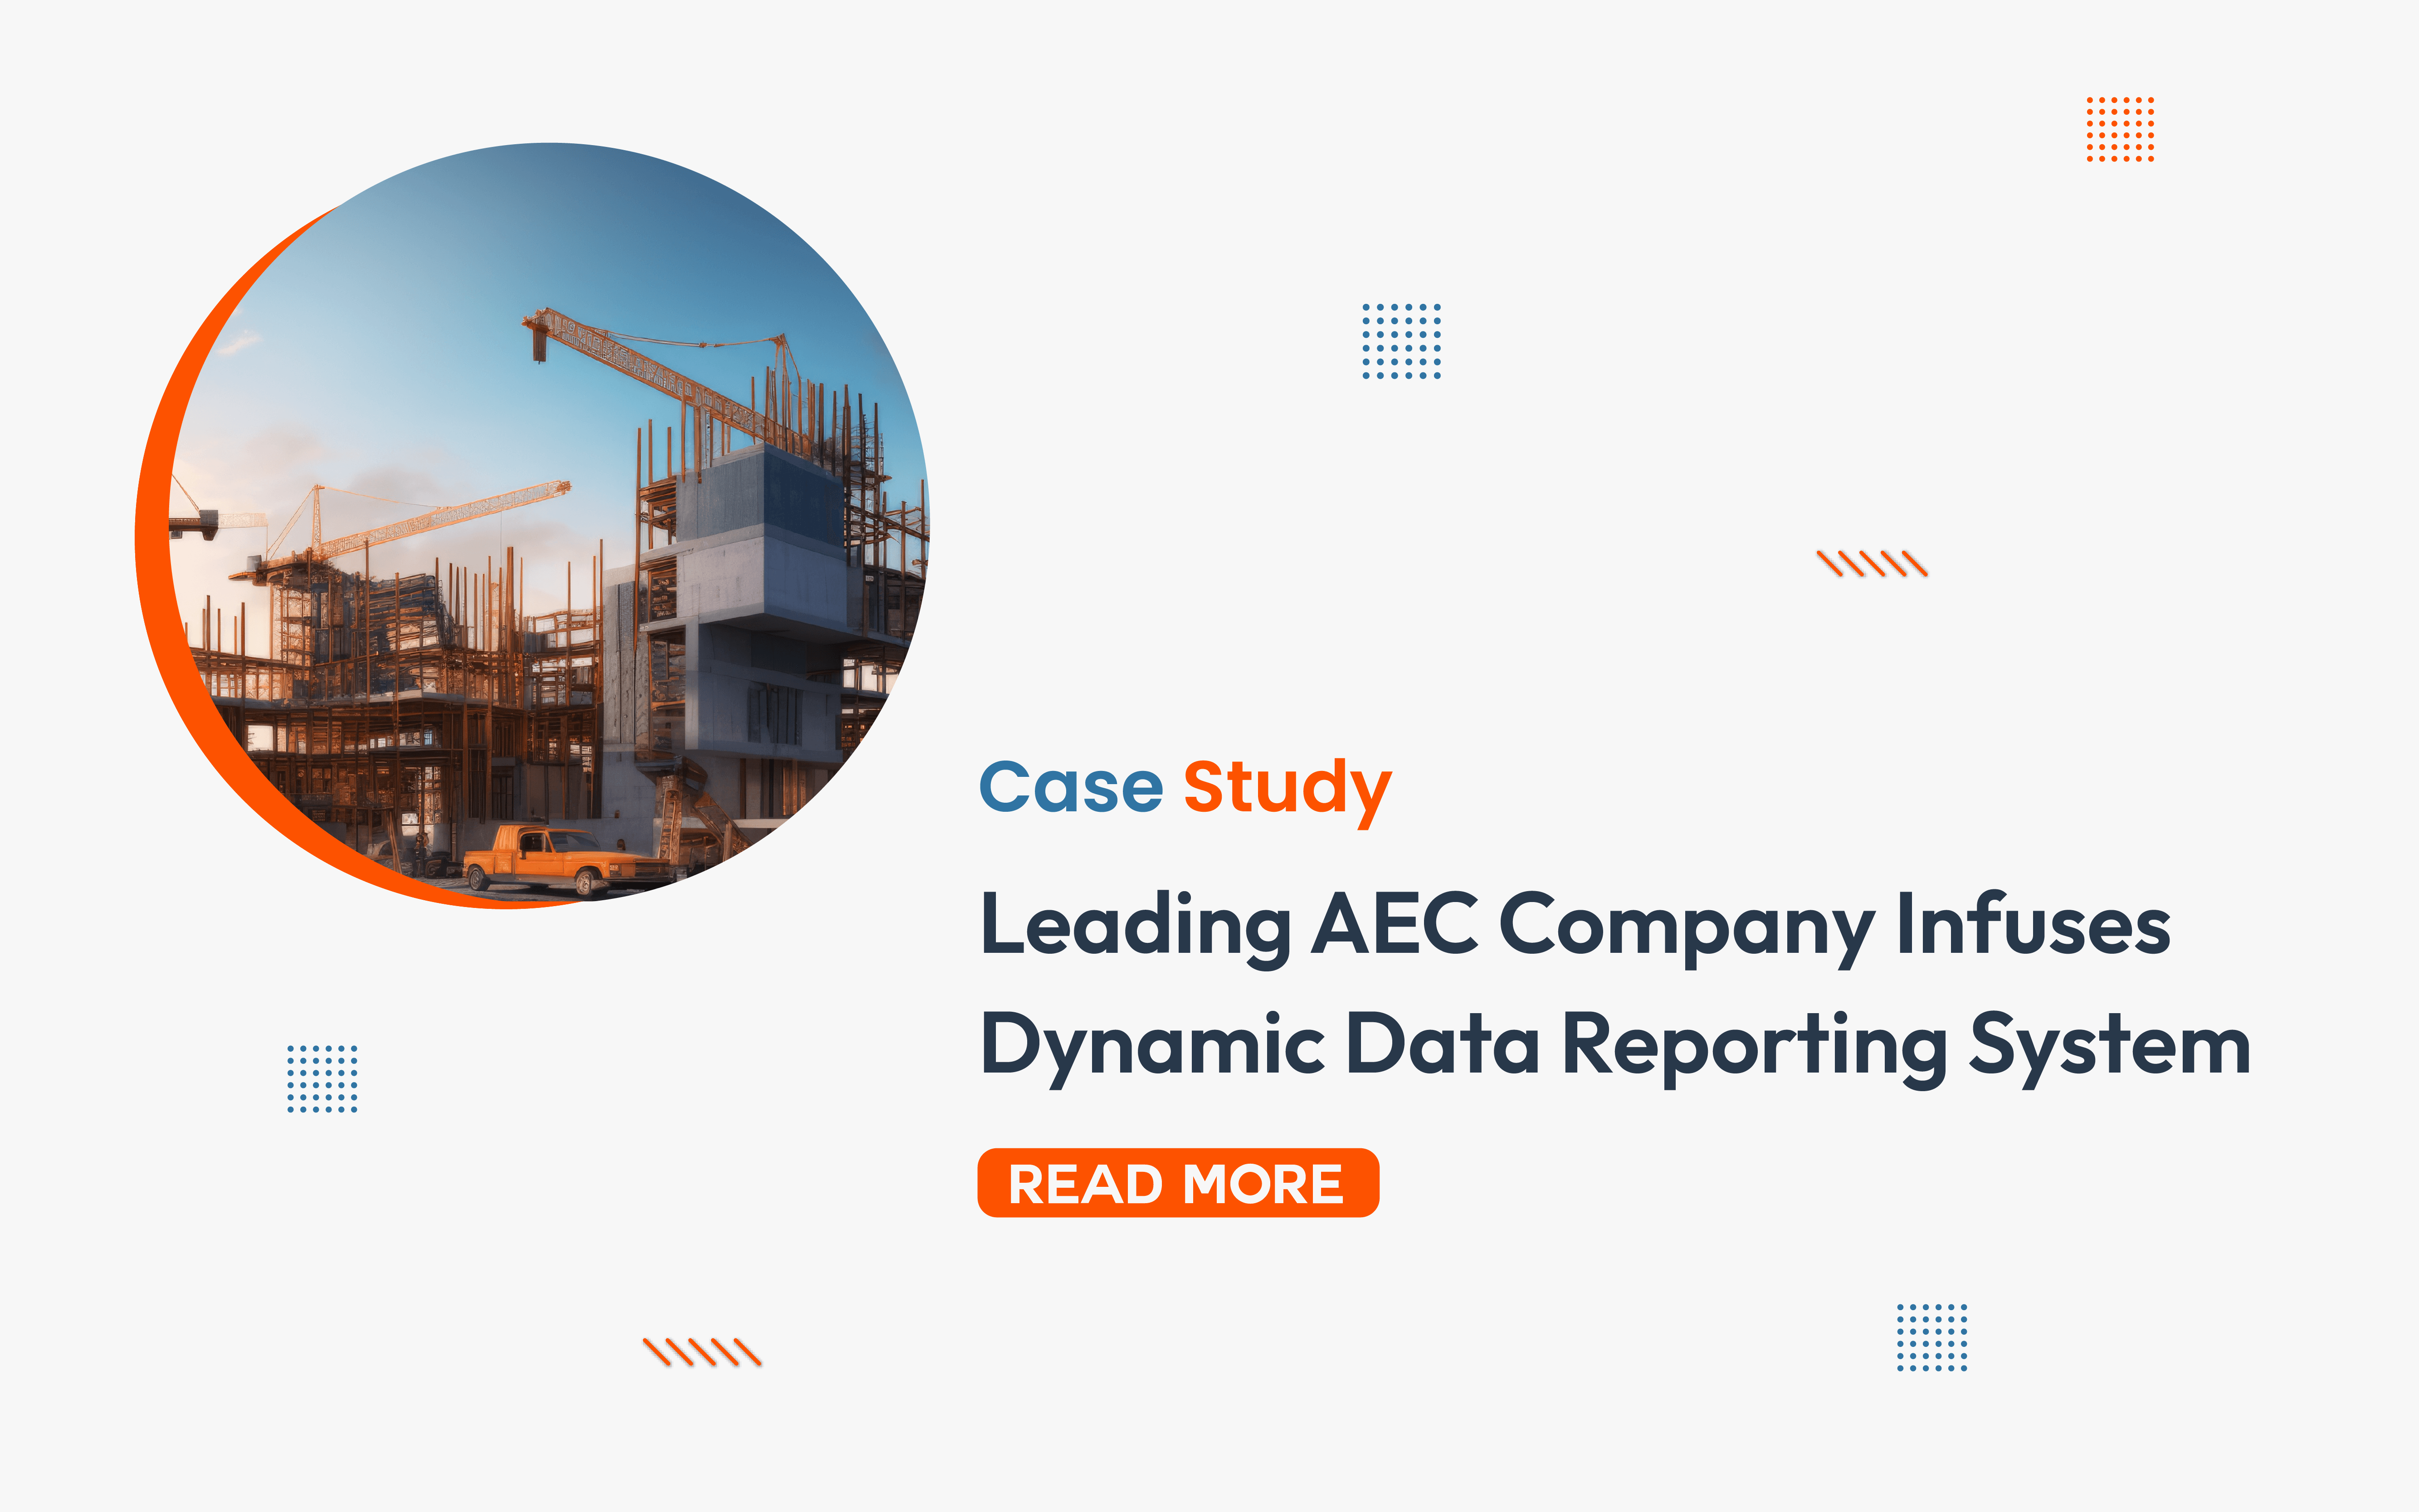 Case Study_Leading AEC Company Infuses Dynamic Data Reporting System